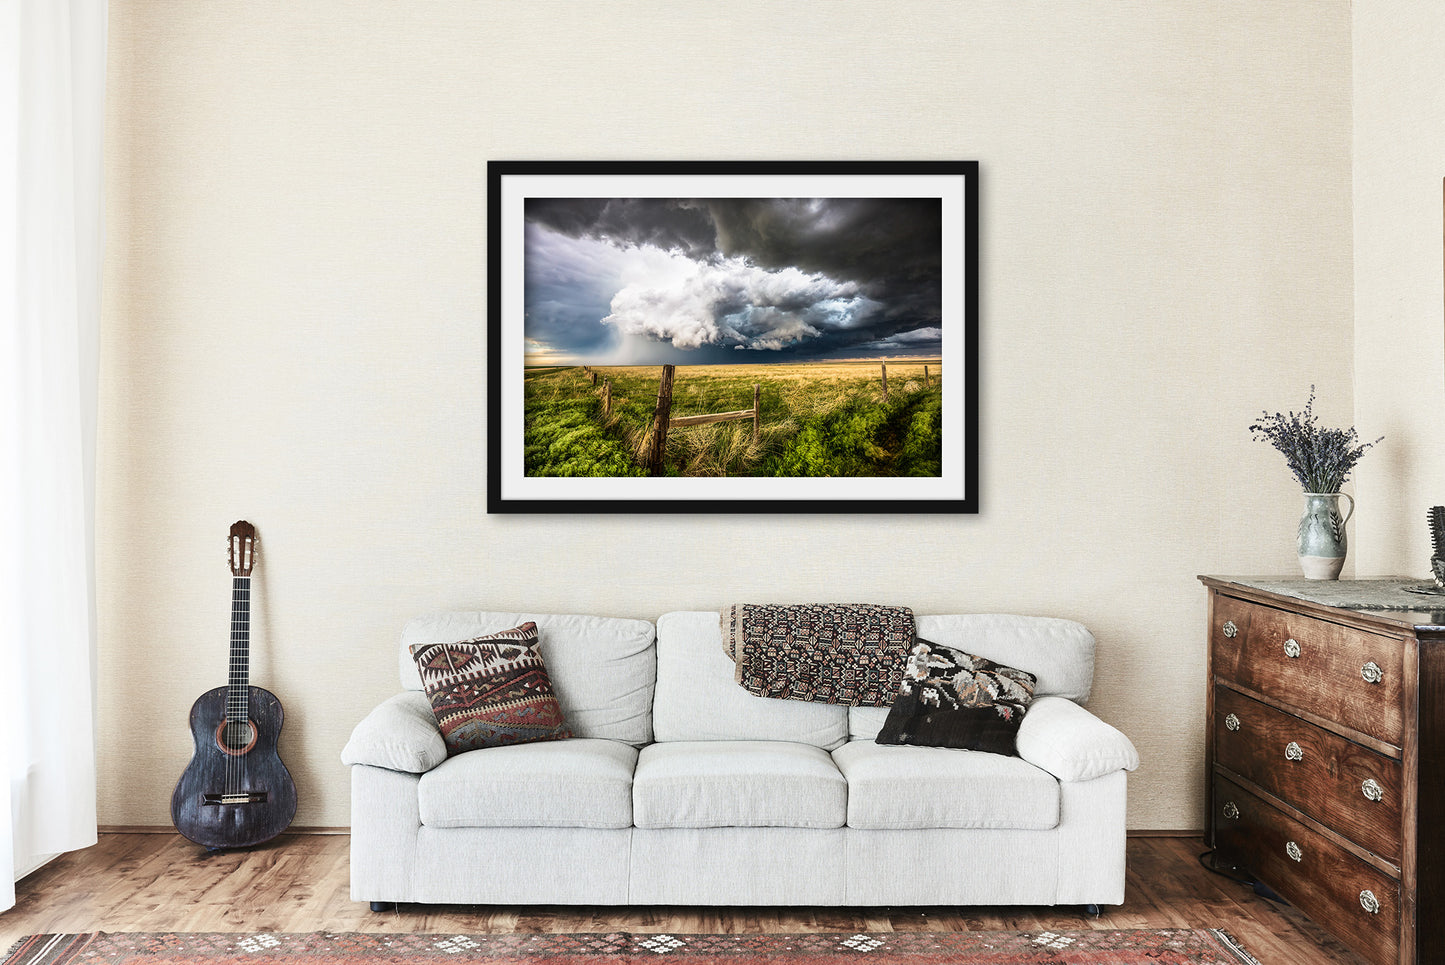 Framed and Matted Print - Picture of Supercell Thunderstorm Over Prairie on Spring Day in Colorado - Great Plains Wall Art Storm Decor